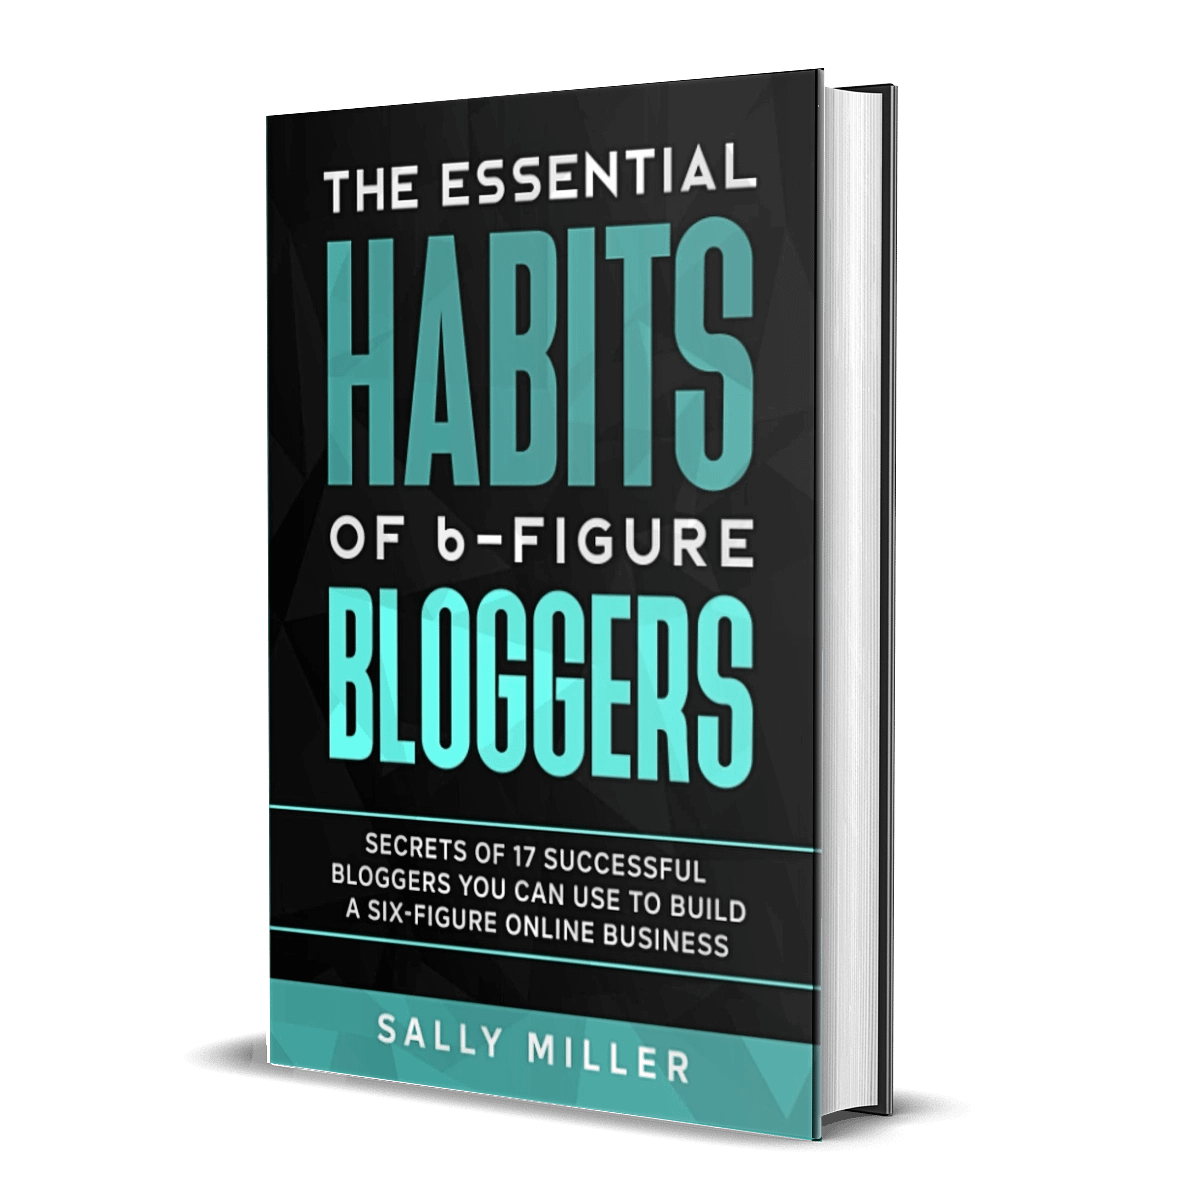 The Essential Habits Of 6-Figure Bloggers by Sally Miller is one of the best blogging books to learn from successful bloggers. 